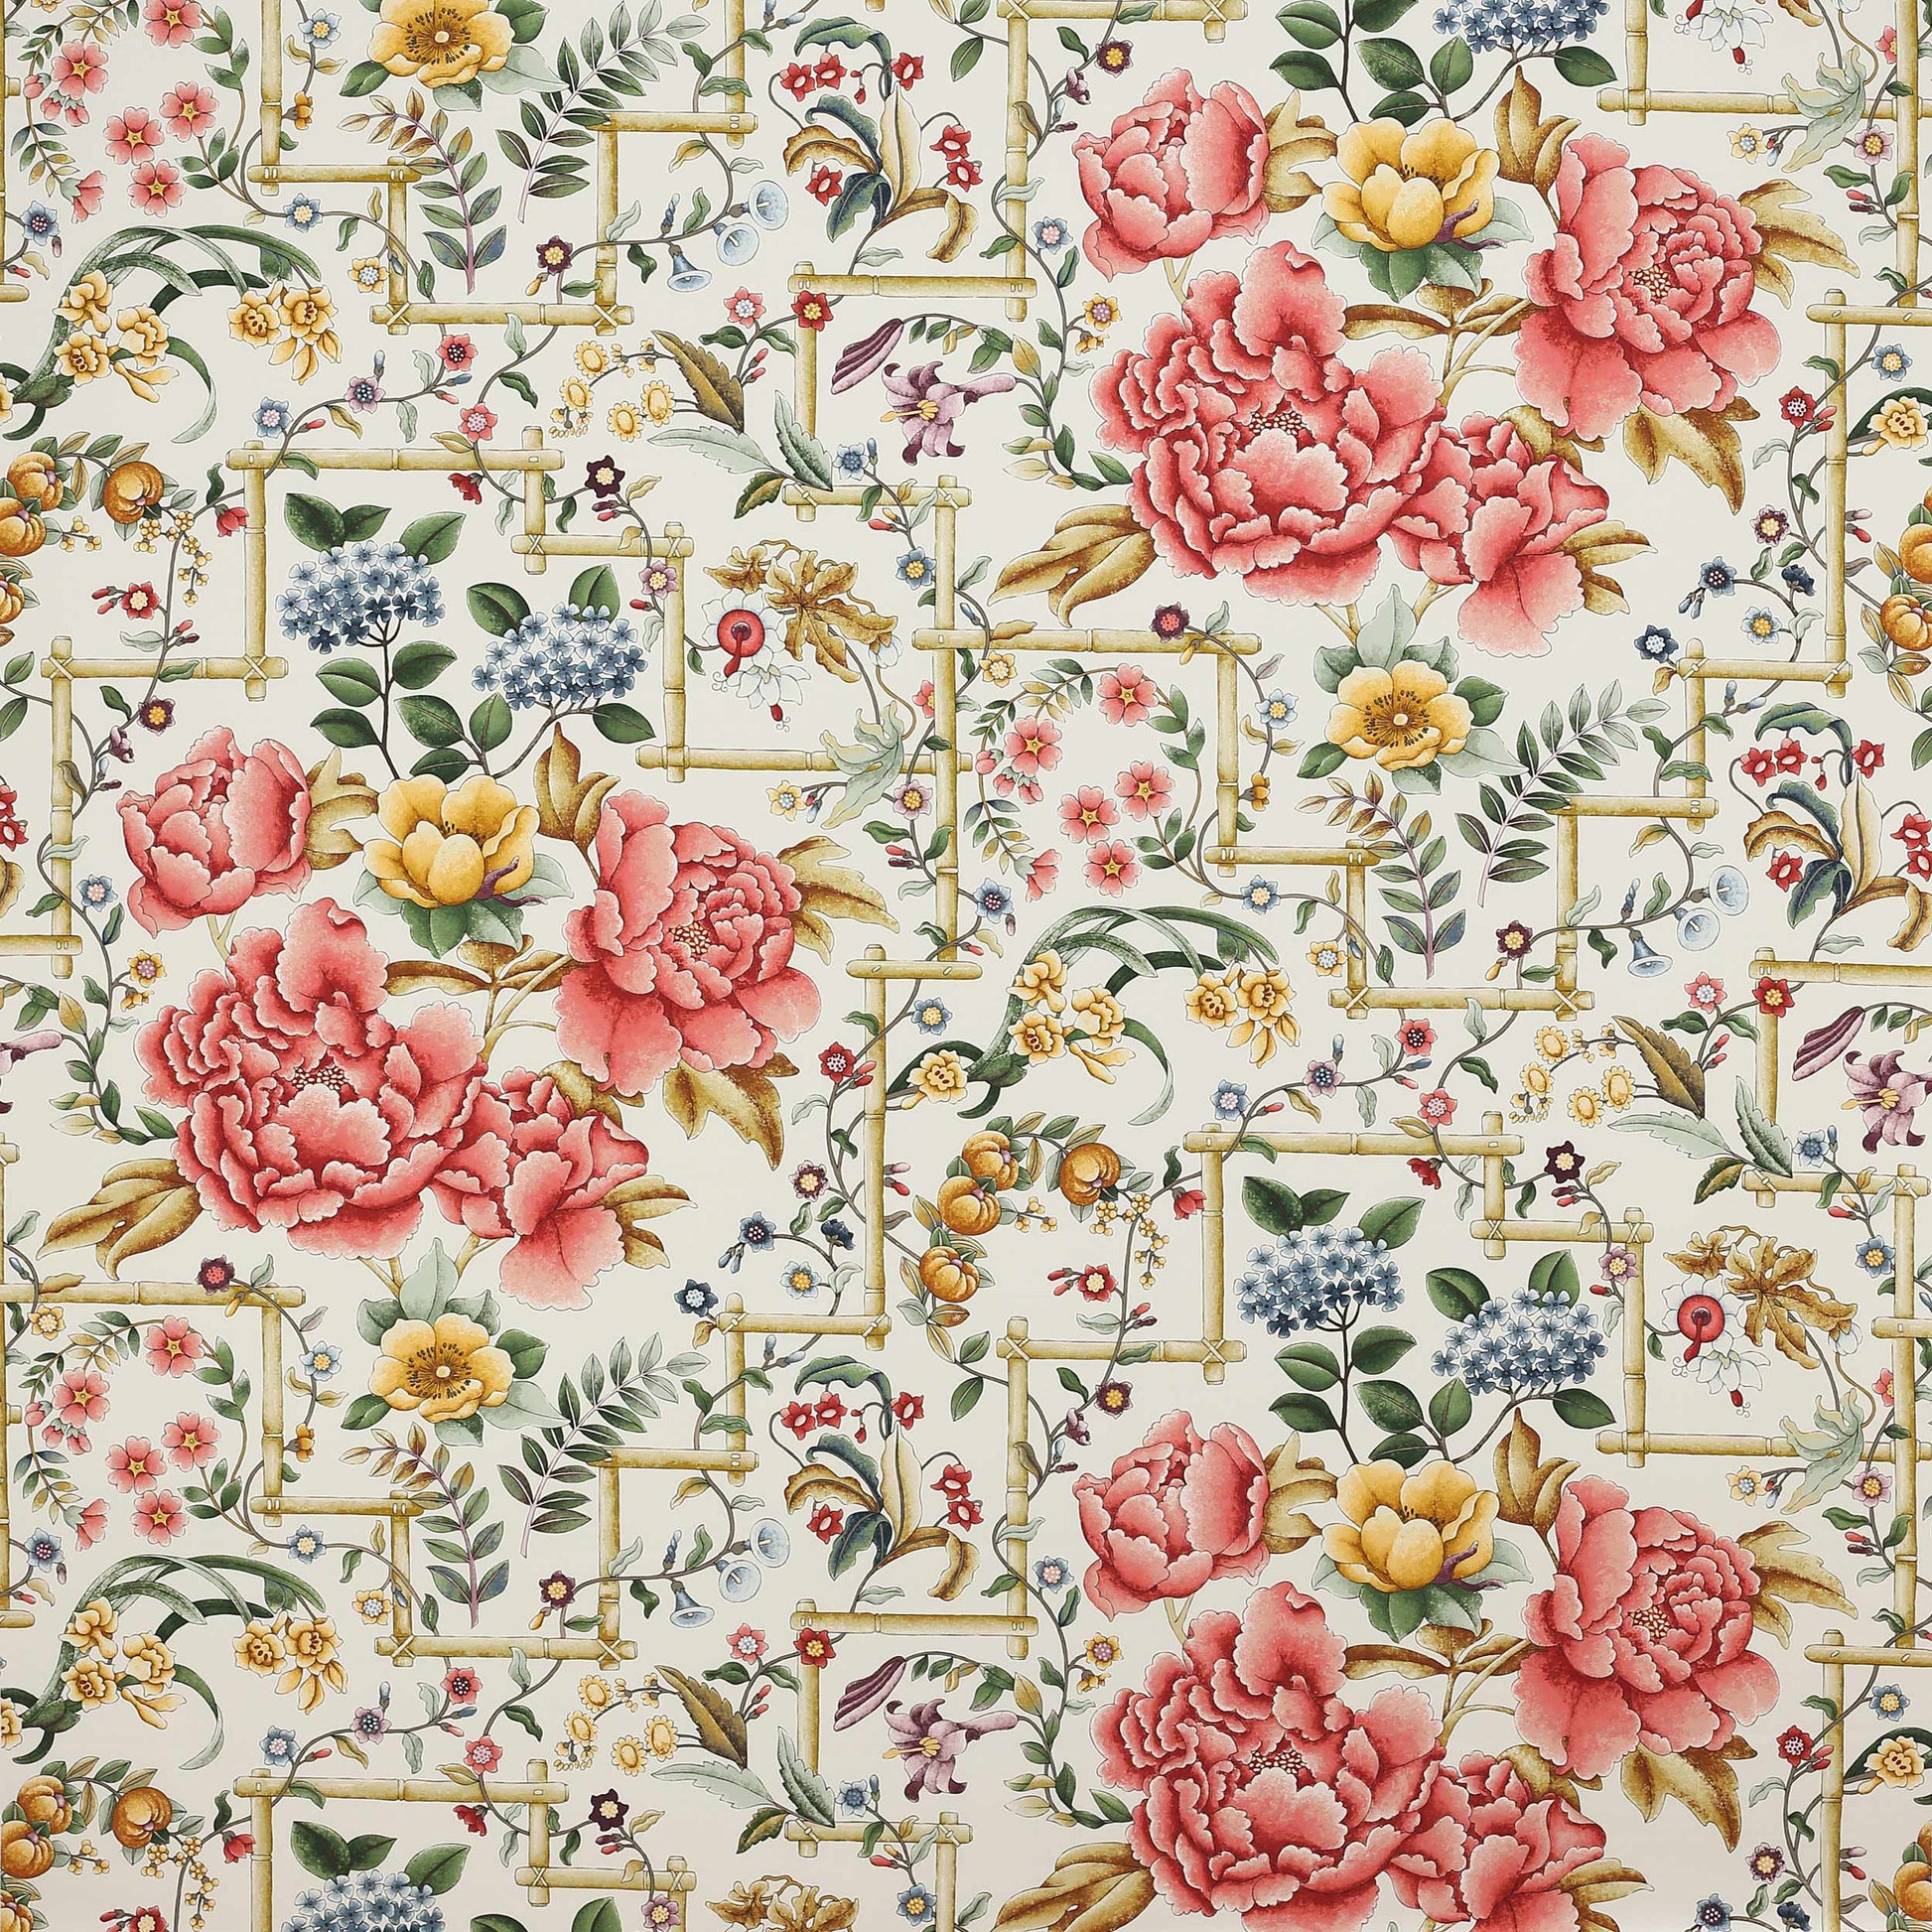 Courances Fabric - Pink 